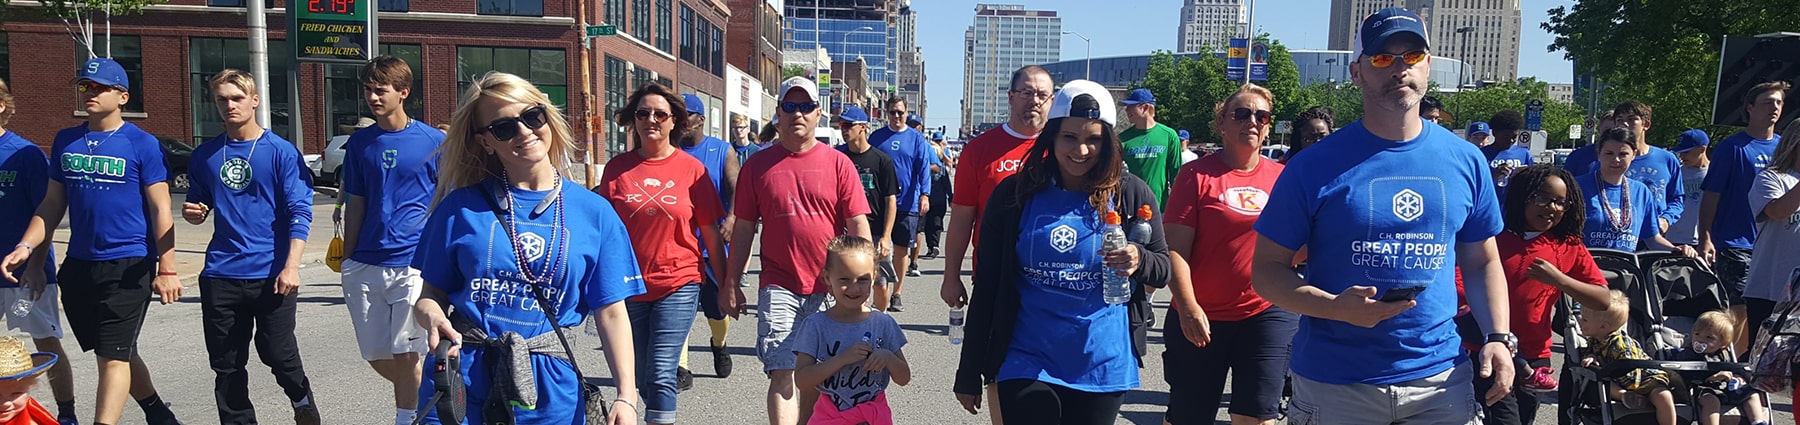 Large group of people walking down street for C.H. Robinson Great People Great Cause walk